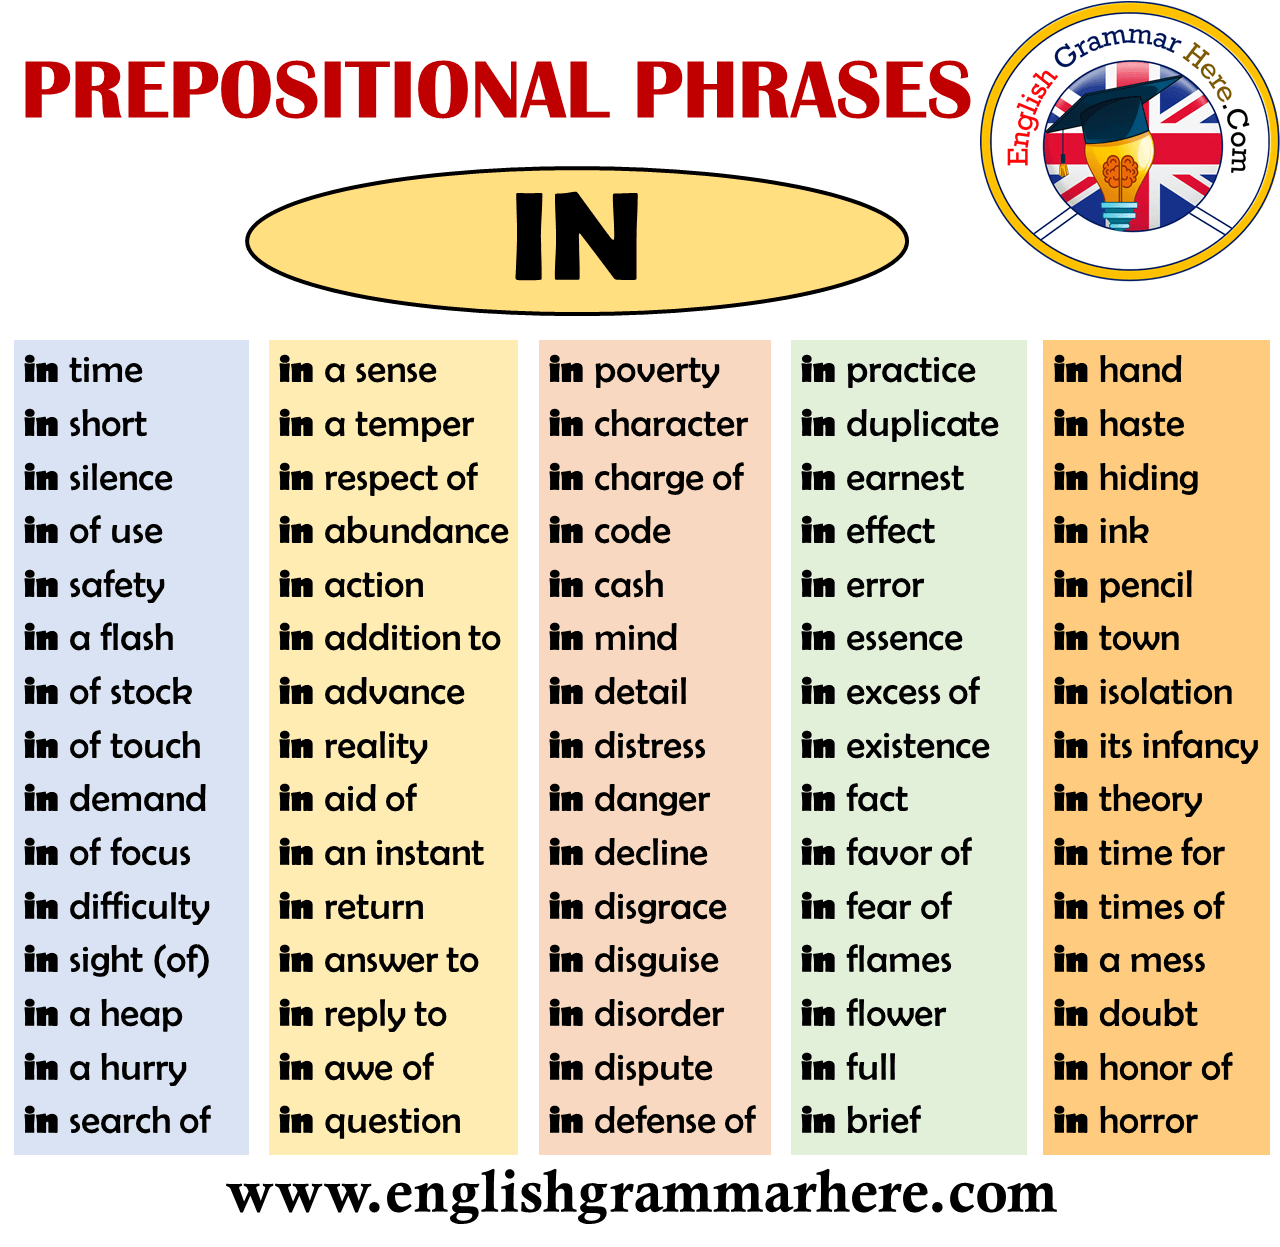 English Prepositional Phrases - IN